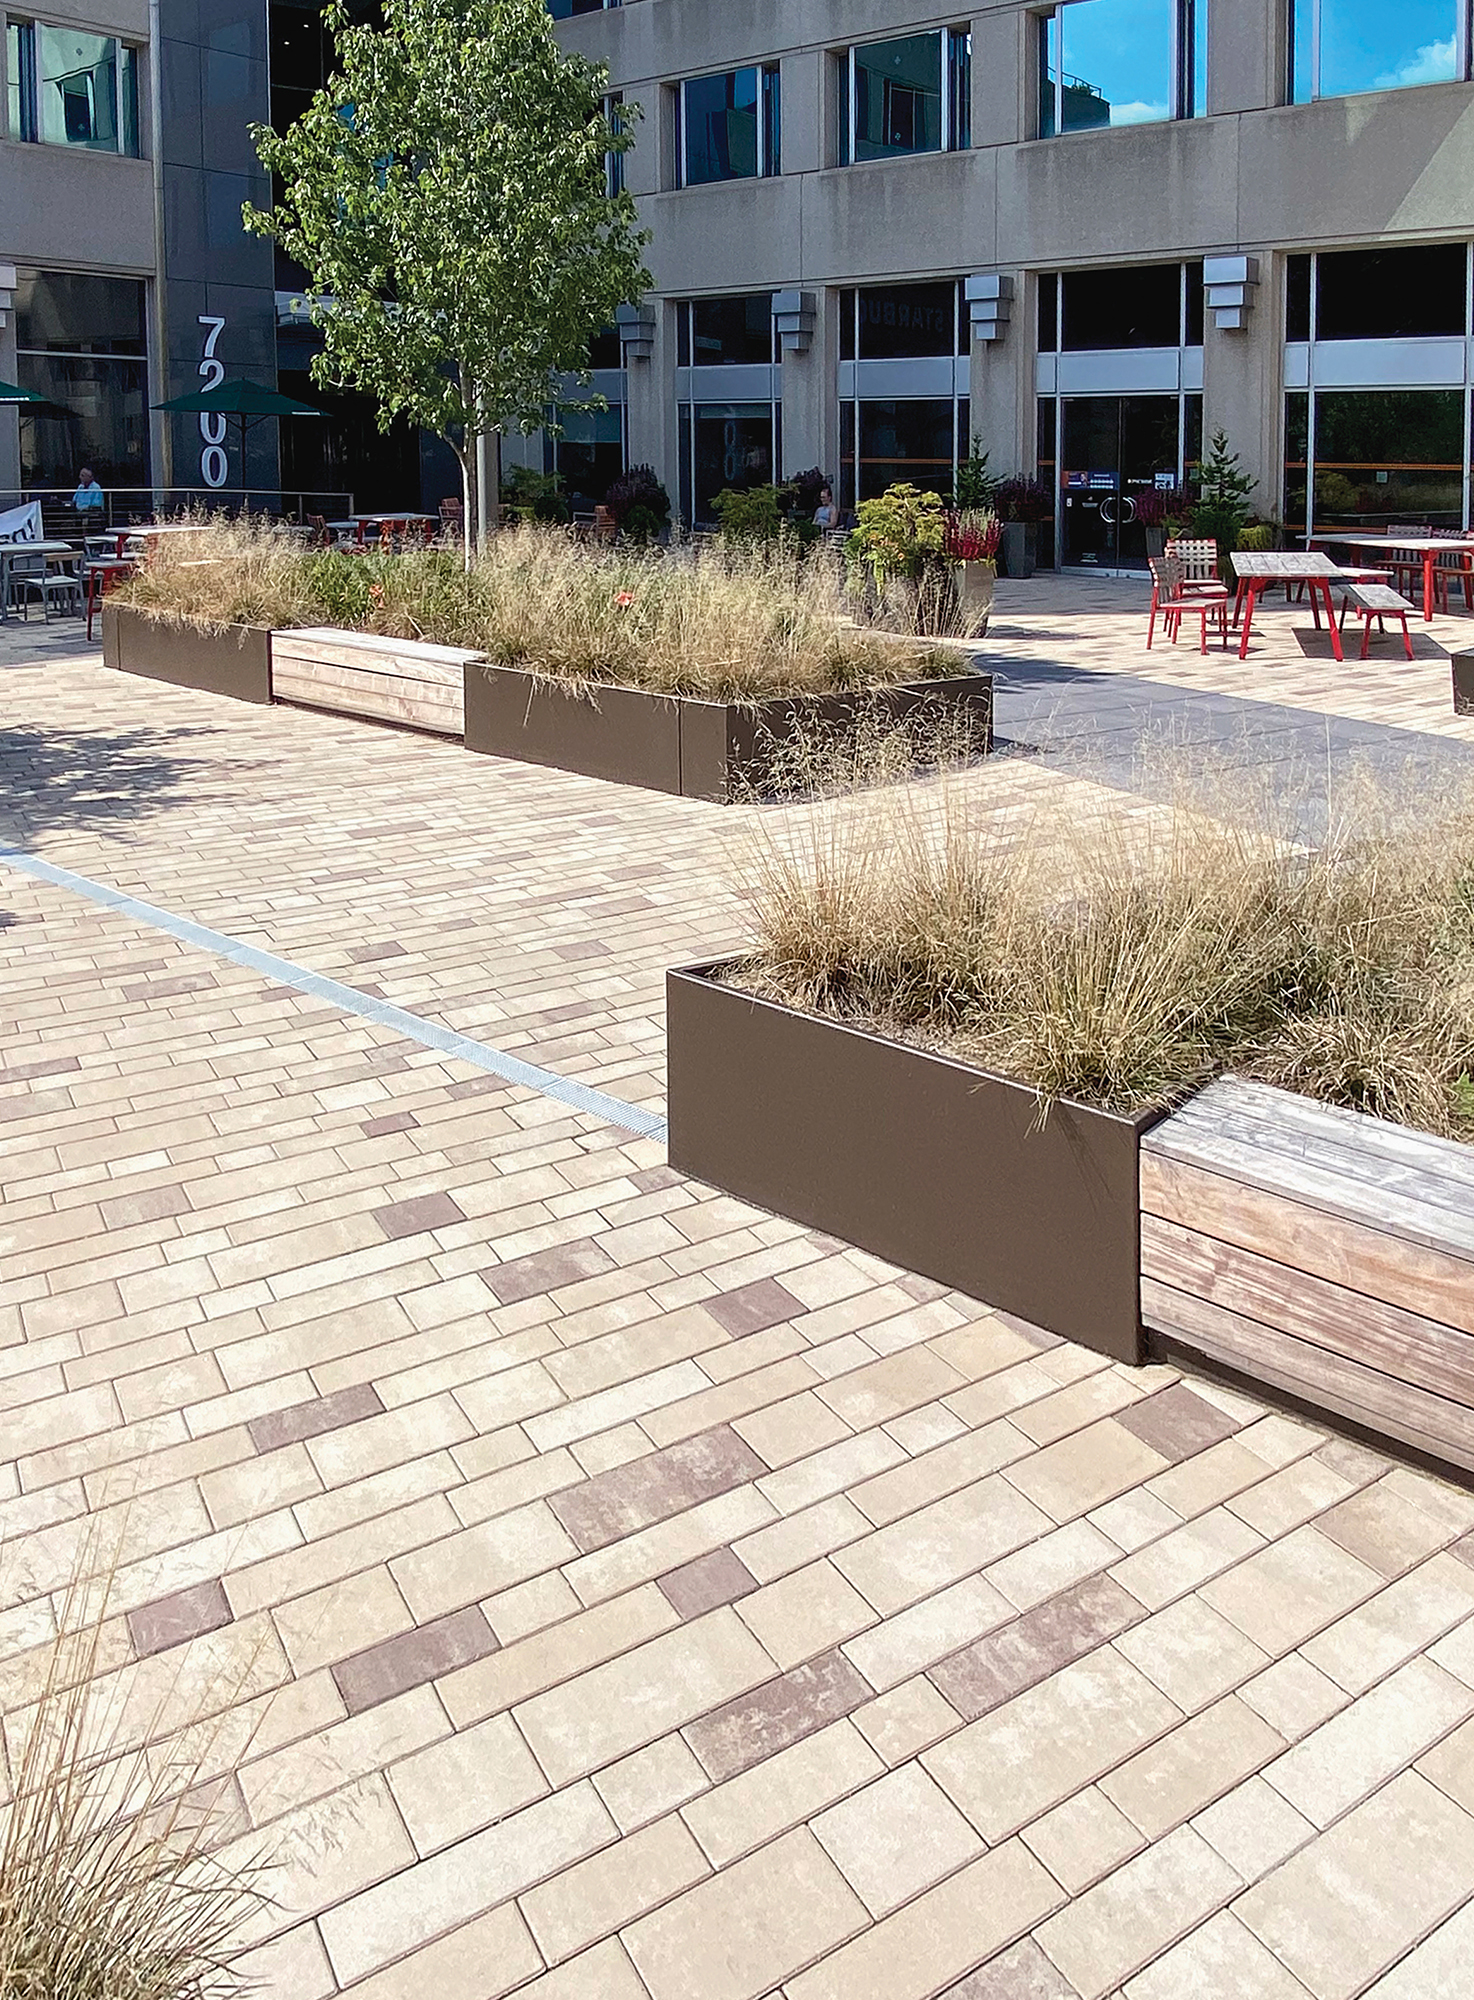 In front of a commercial building, Unilock Artline rectangular pavers in contrasting colors create a plaza with gardens and dining areas.